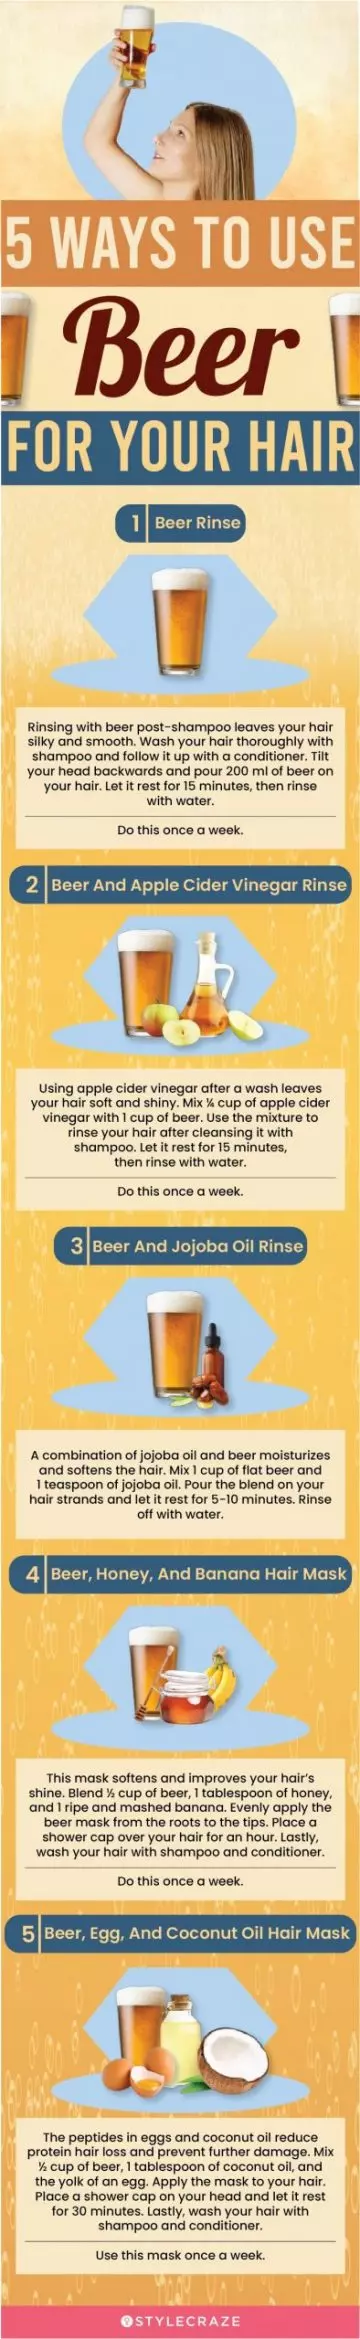 5 ways to use beer for your hair (infographic)